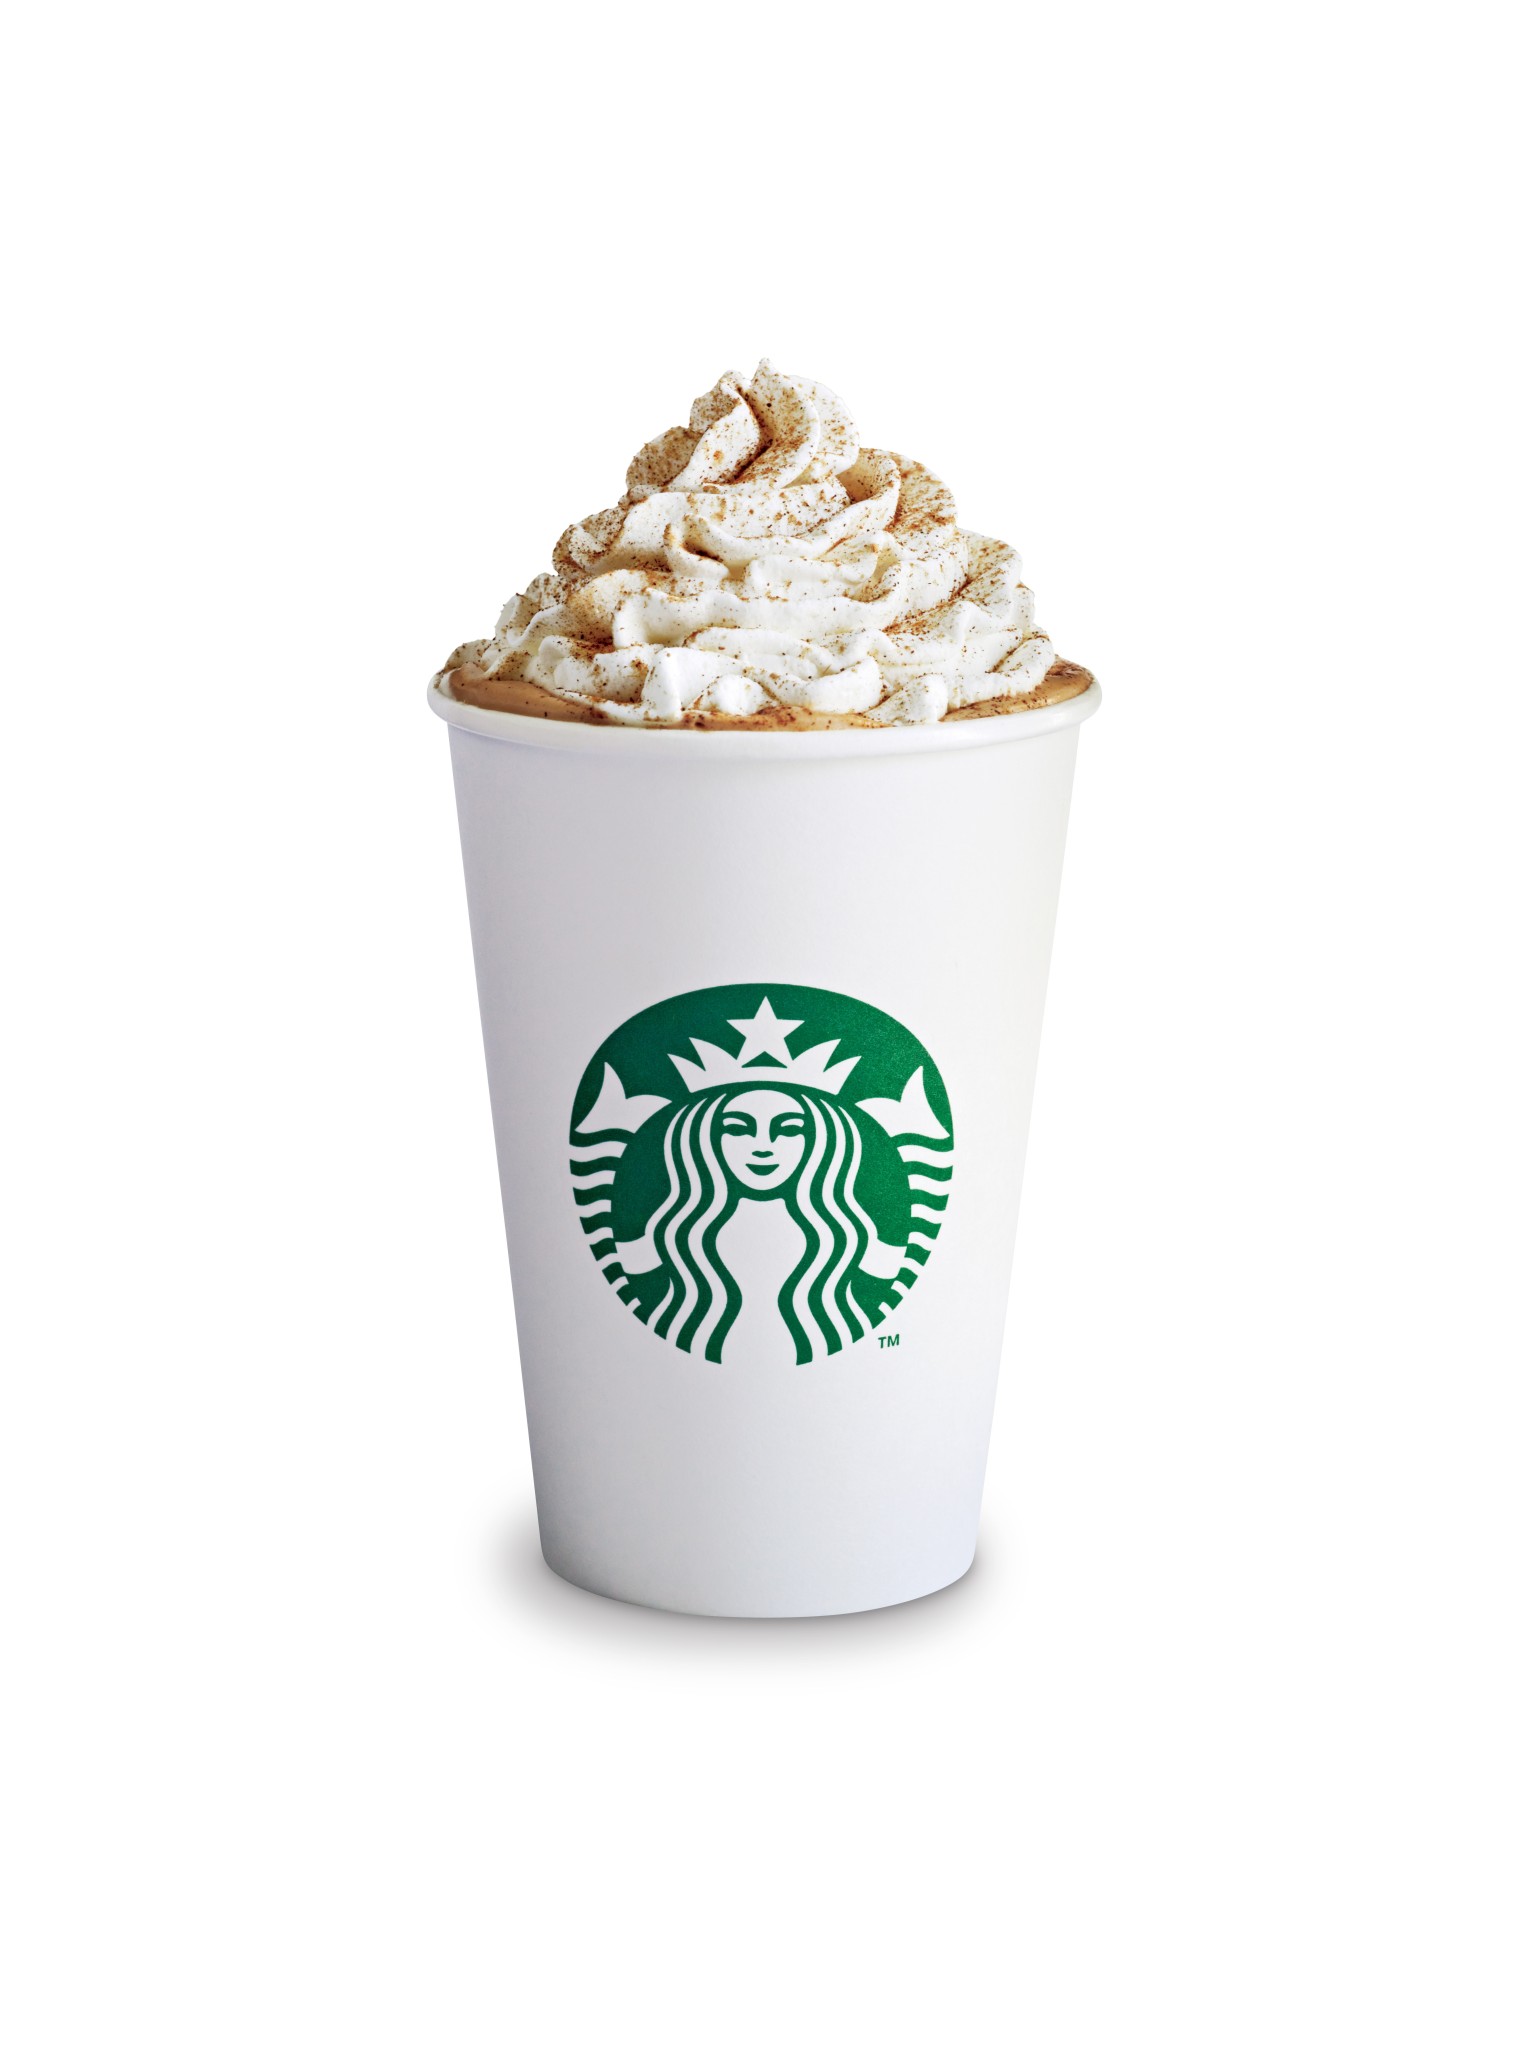 Get A Pumpkin Spice Latte Early With This Secret Code